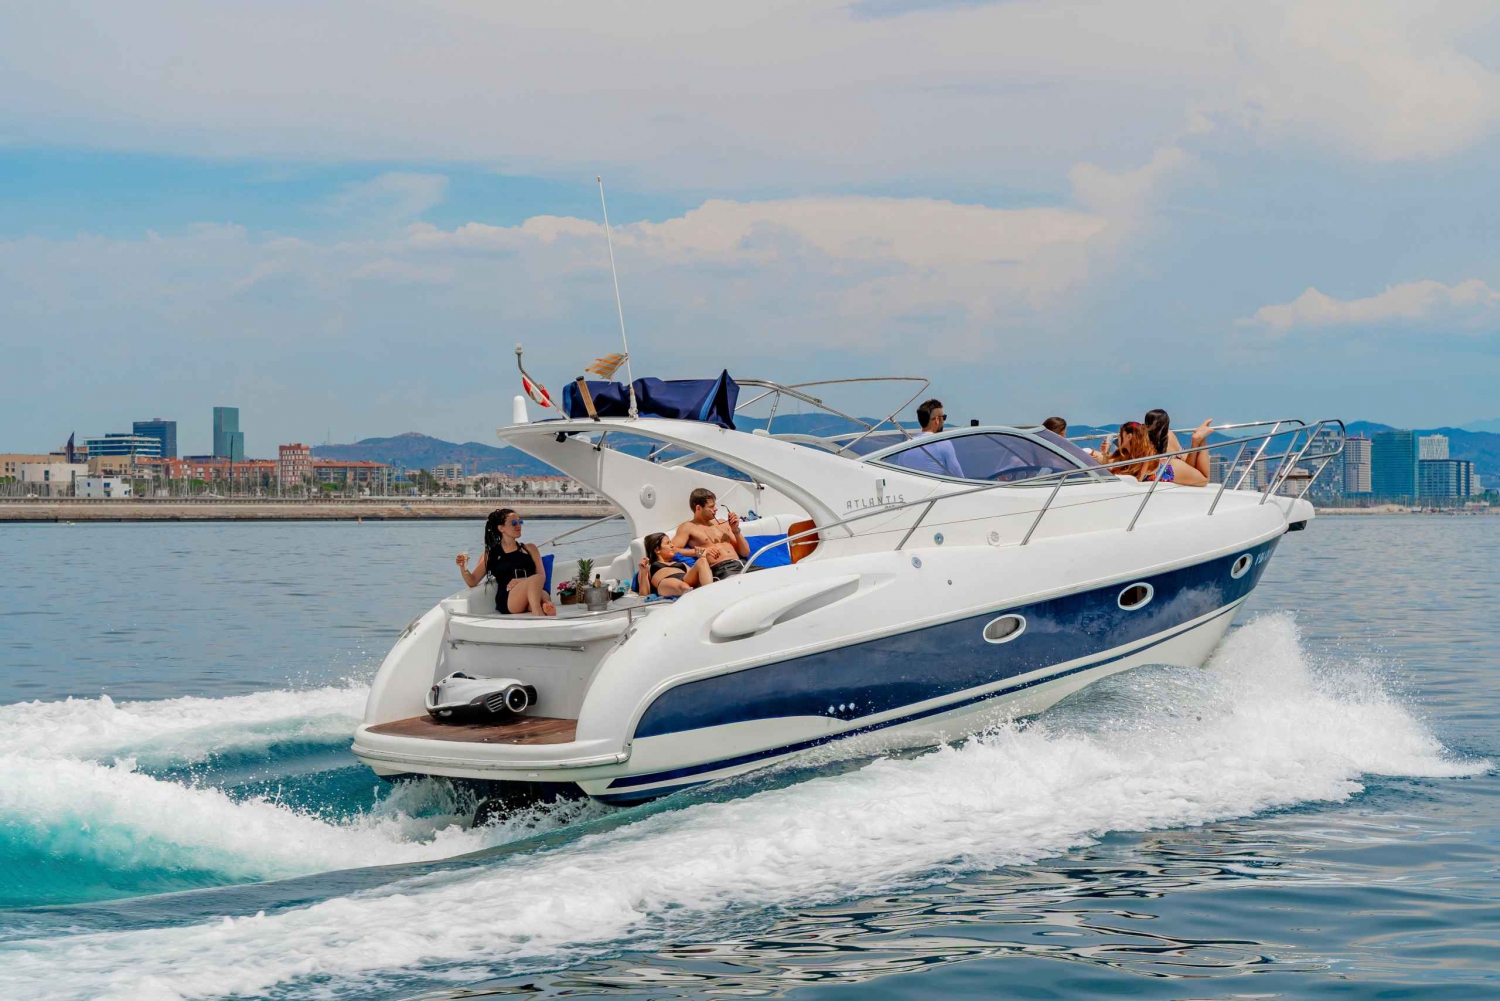 Barcelona: Exclusive Yacht tour with Drinks and Snacks